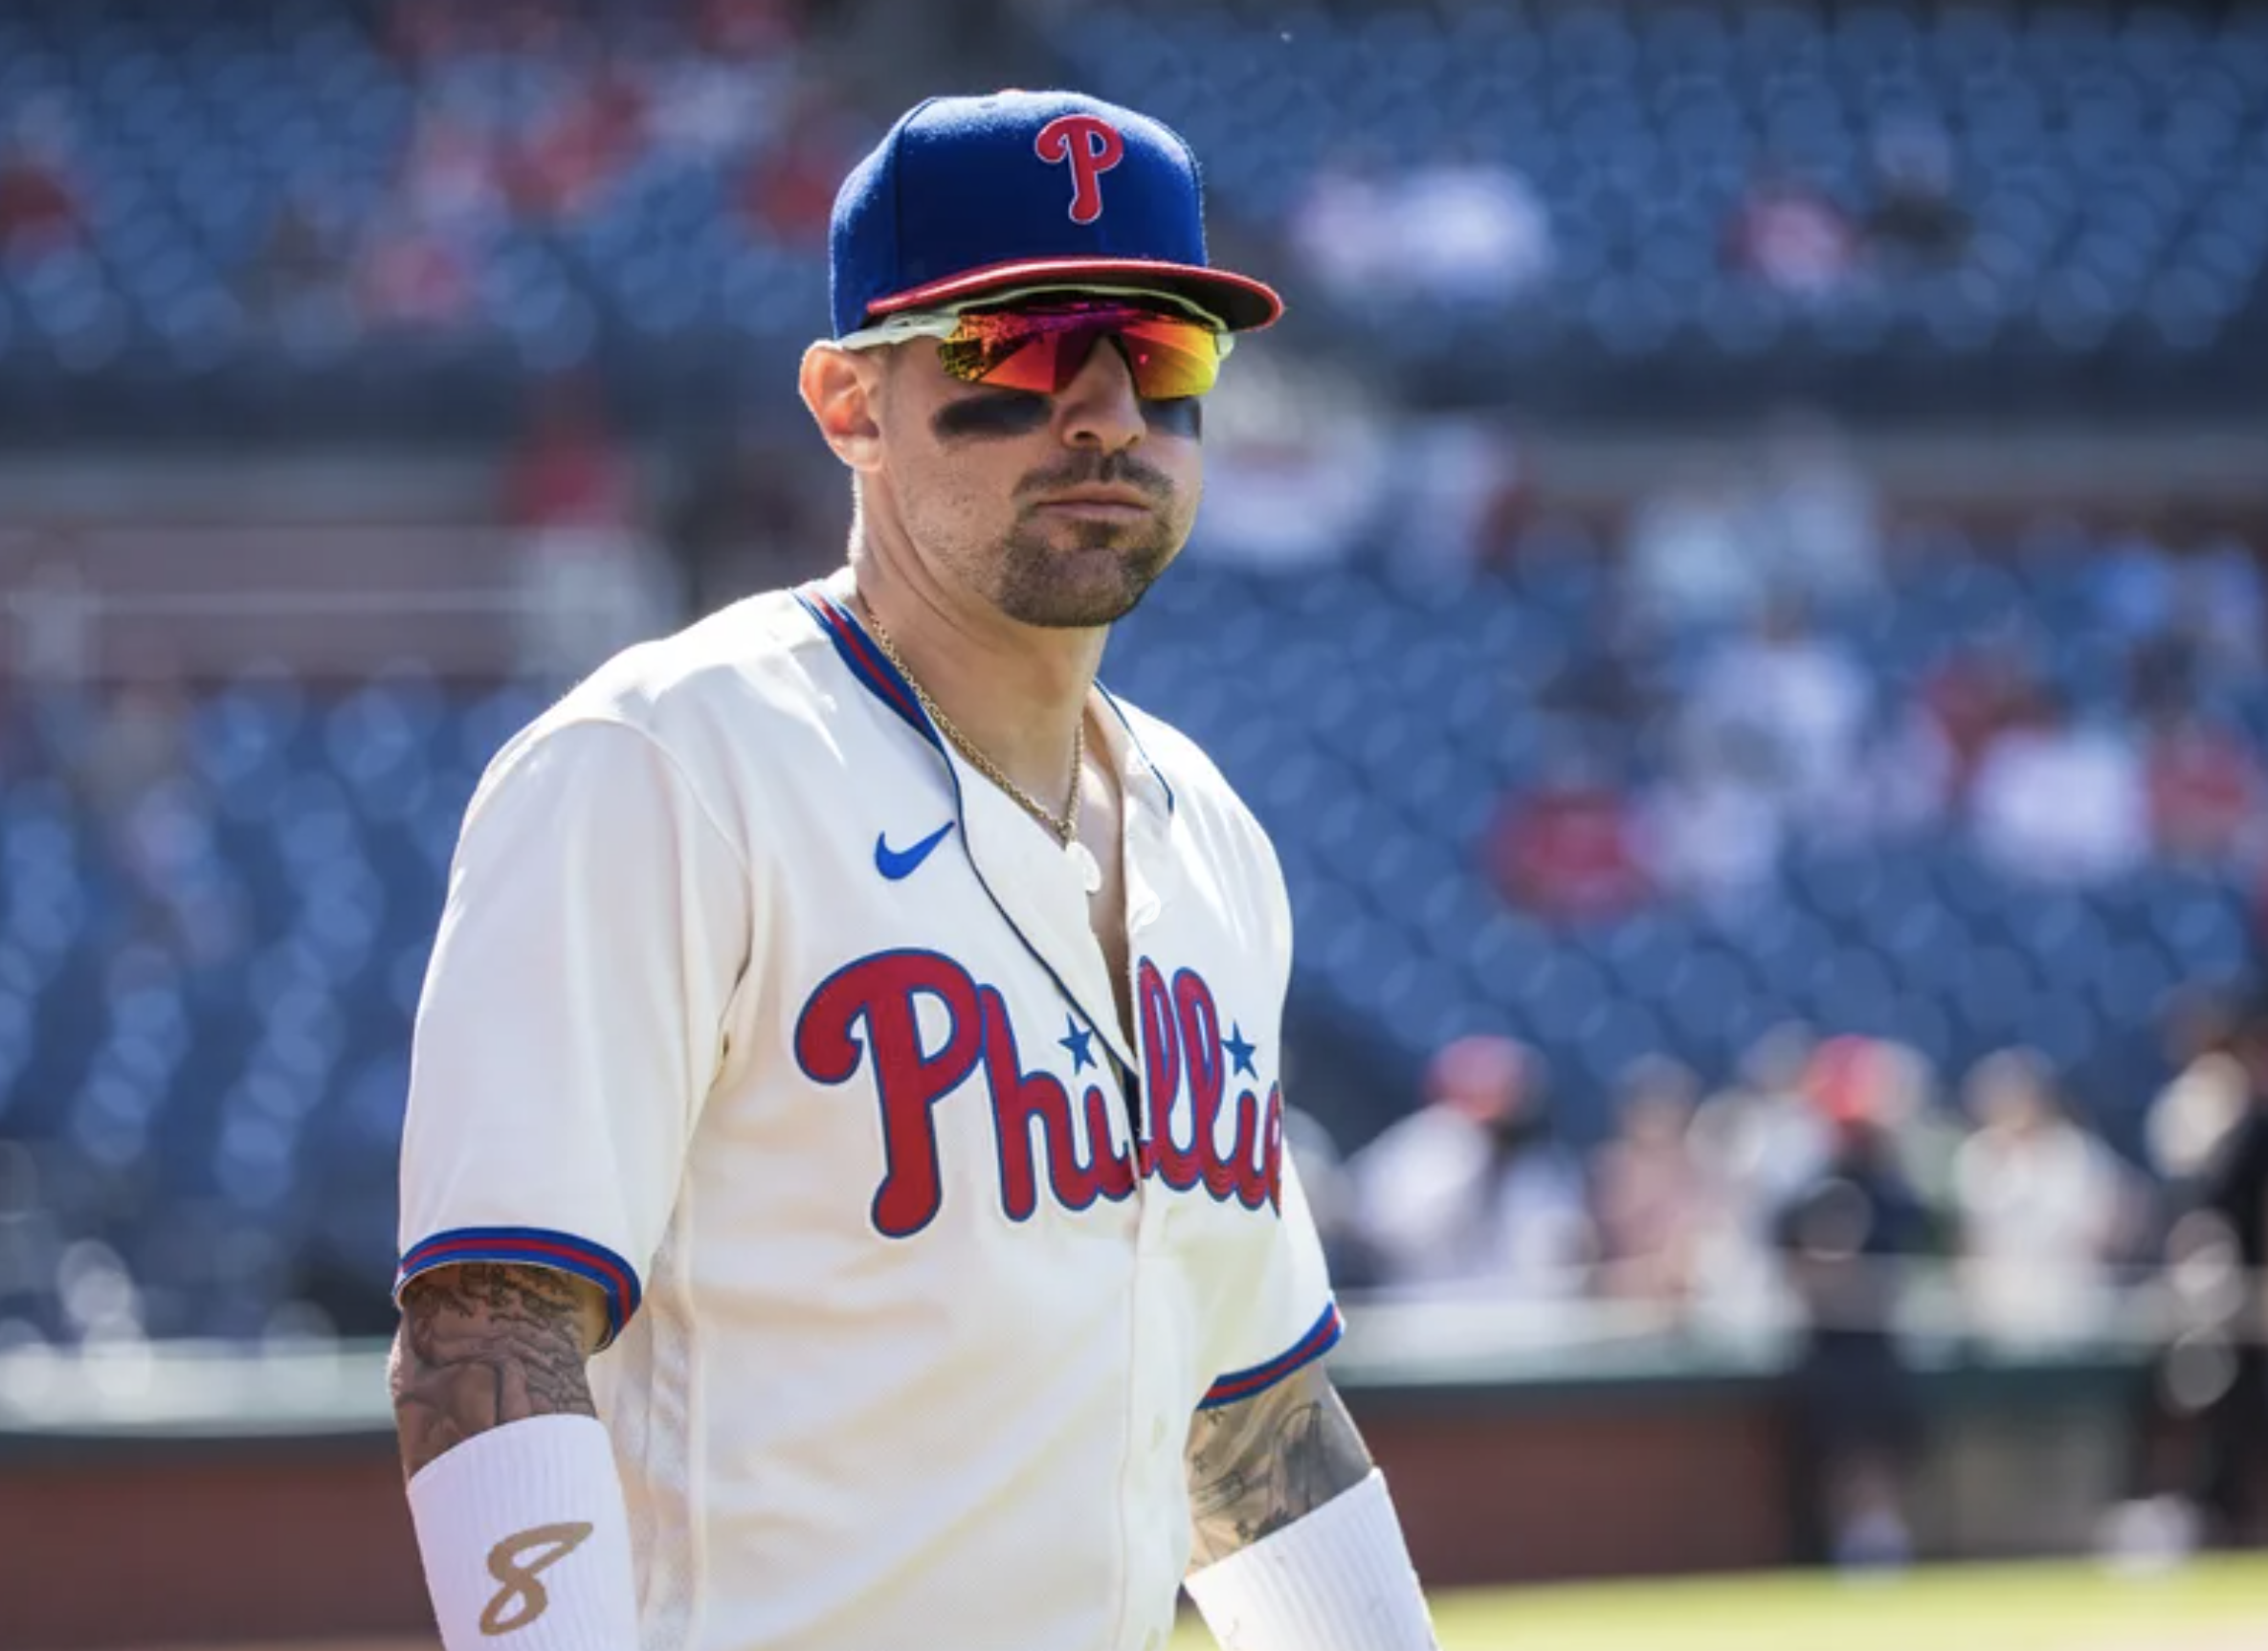 Nick Castellanos to represent Phillies at 2023 MLB All-Star Game